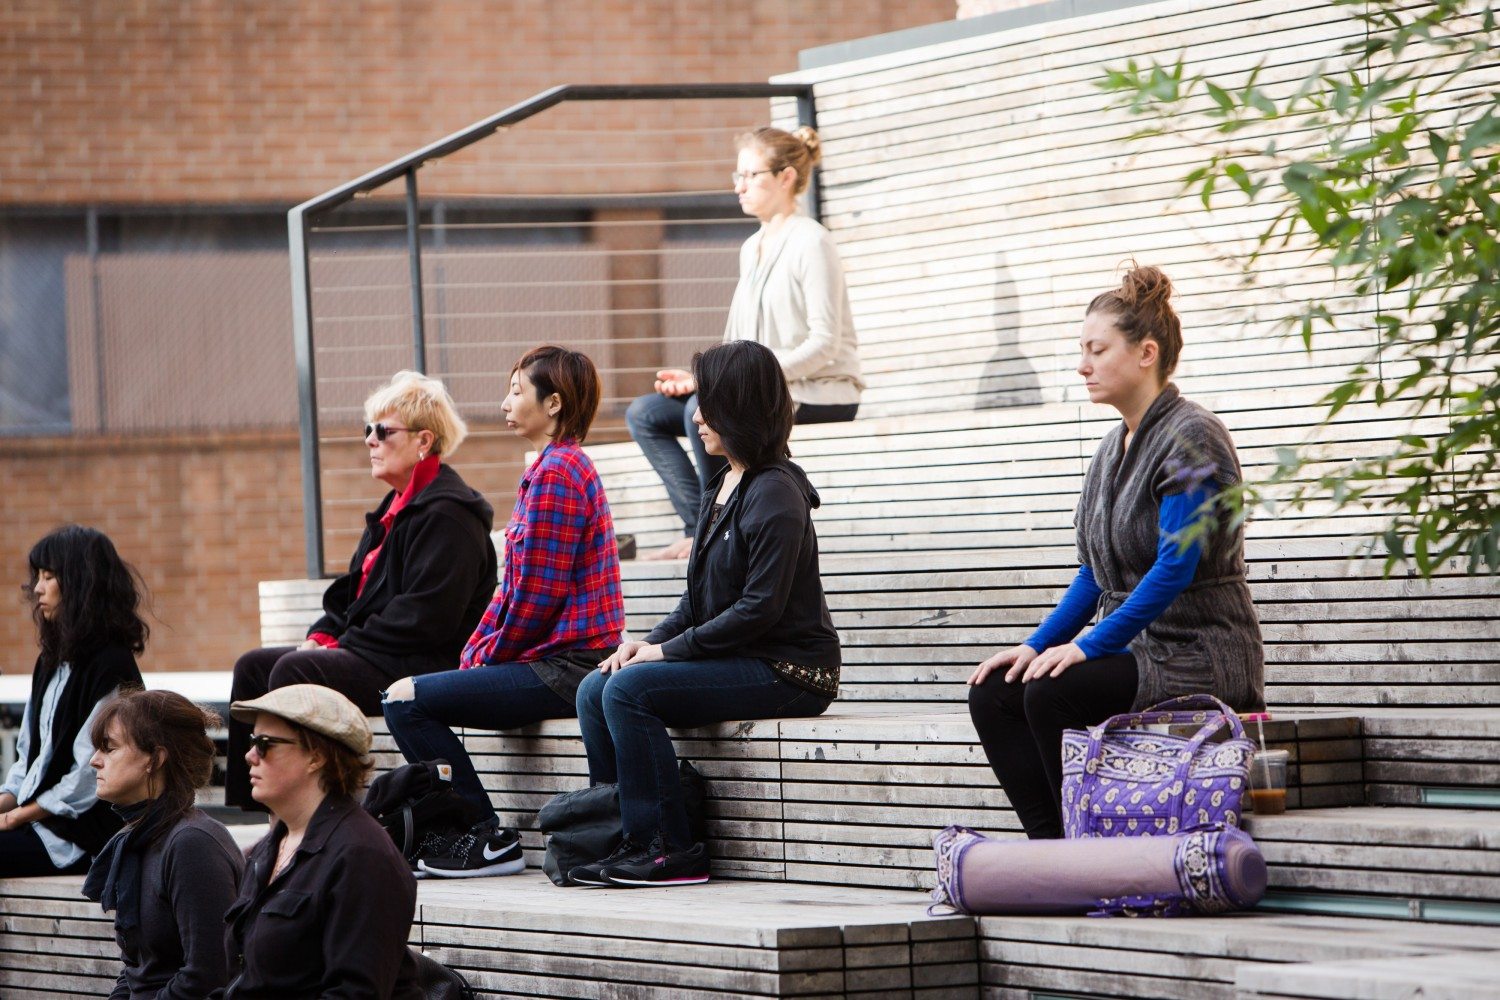 Start Your Wednesday’s With Meditation at The High Line